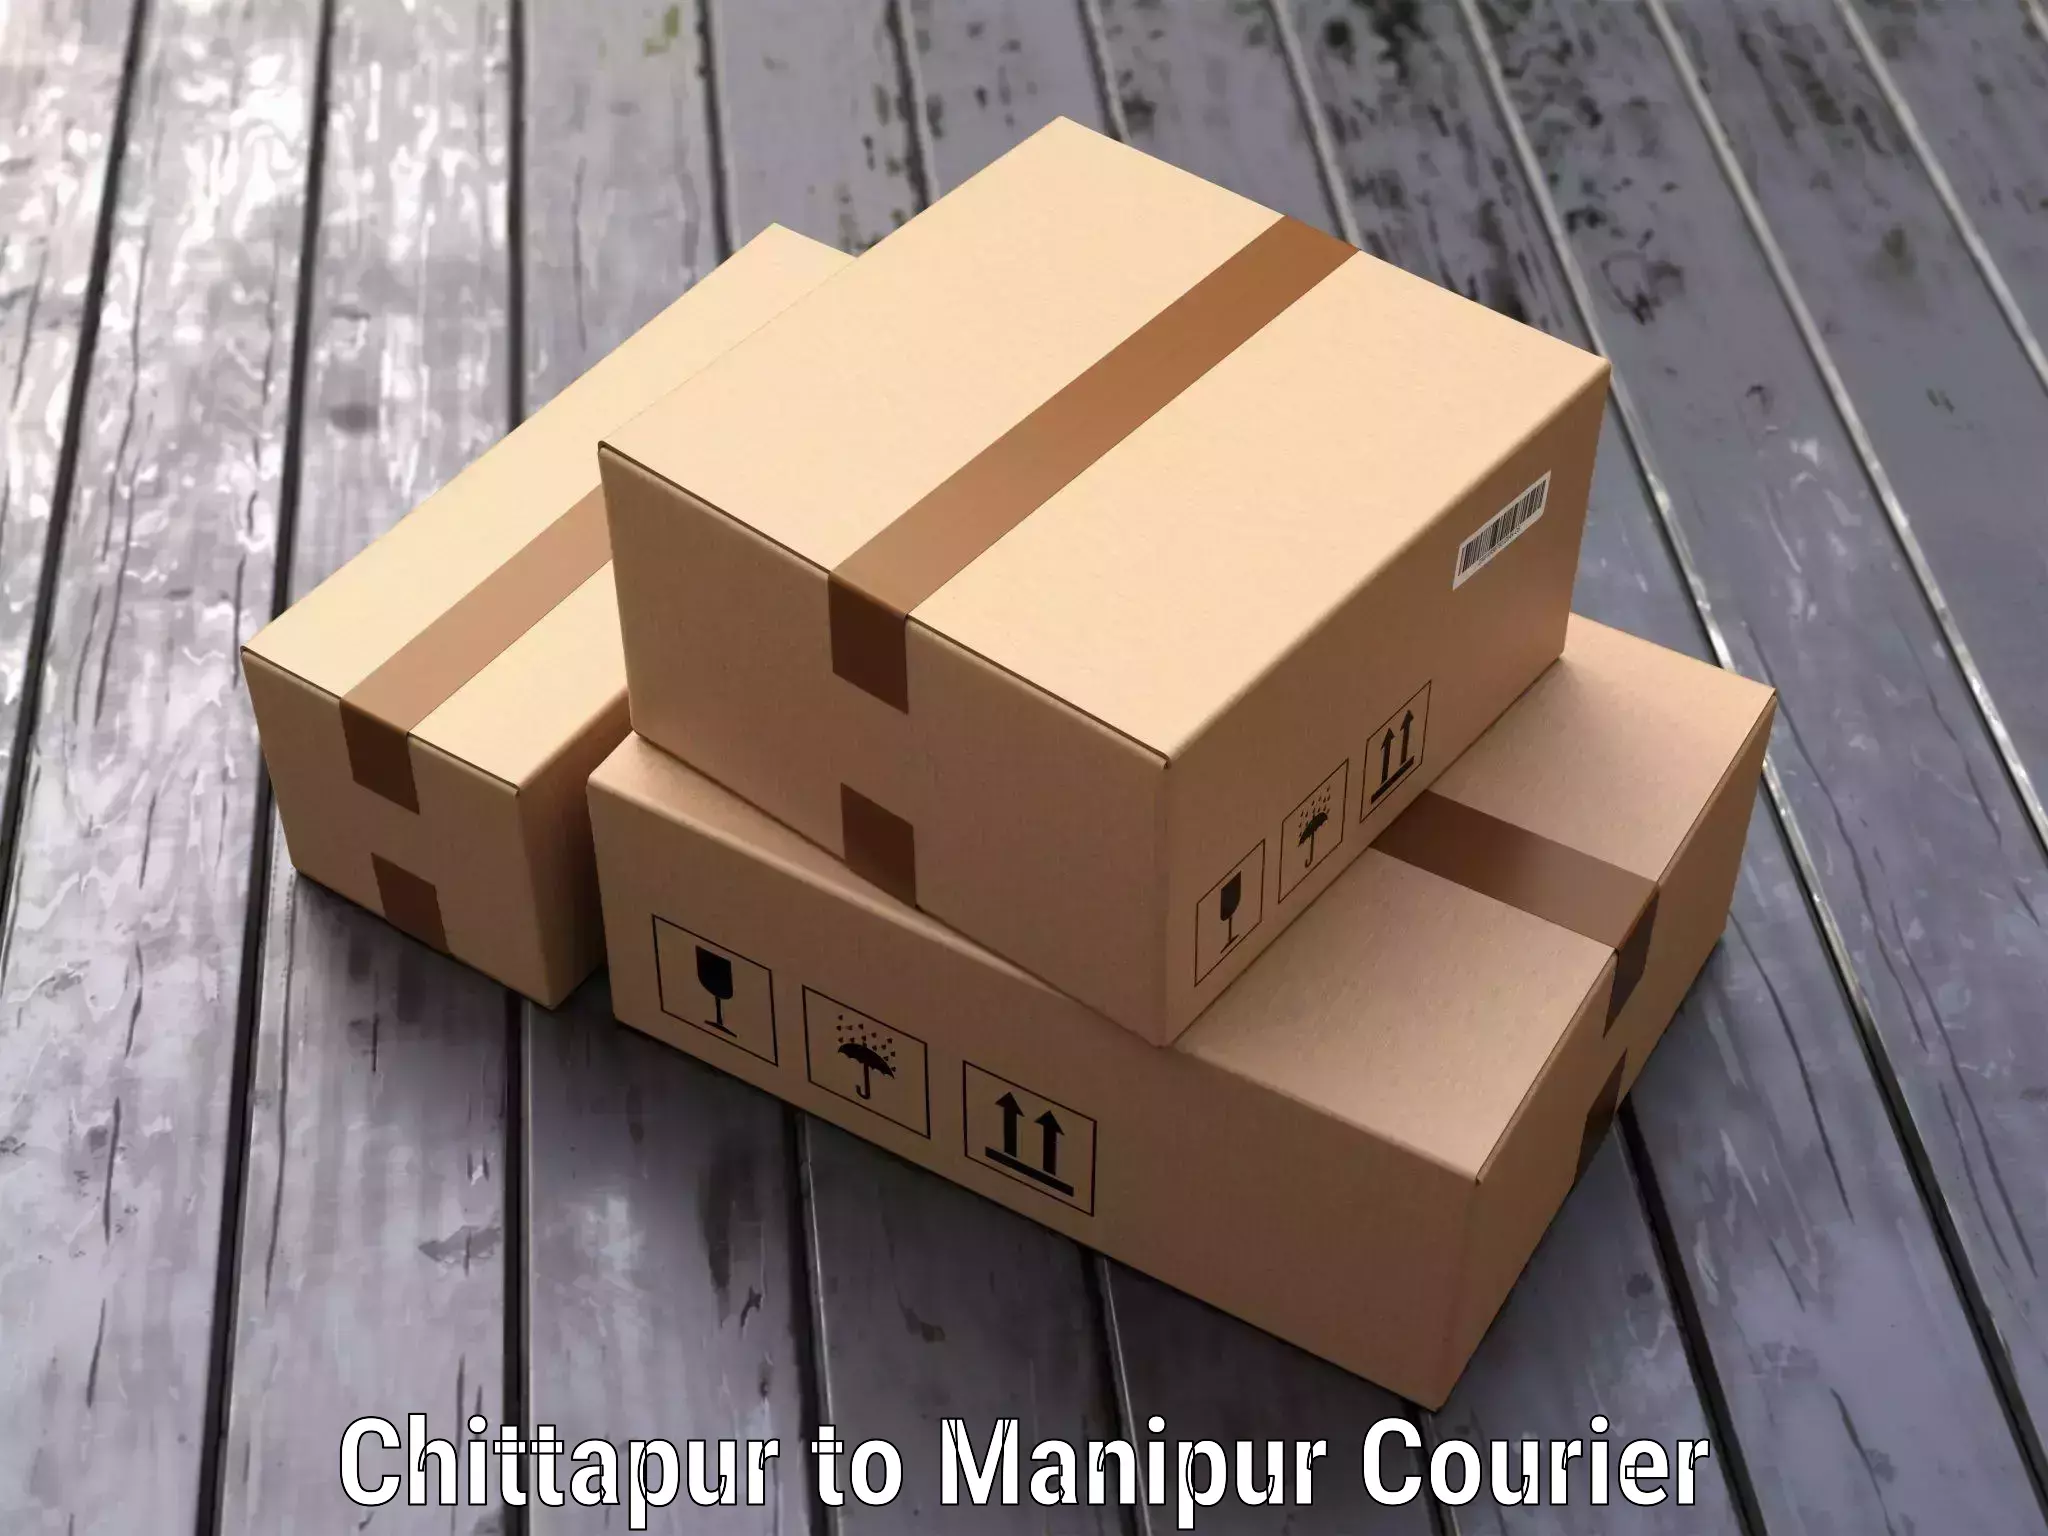 Baggage transport network Chittapur to Manipur